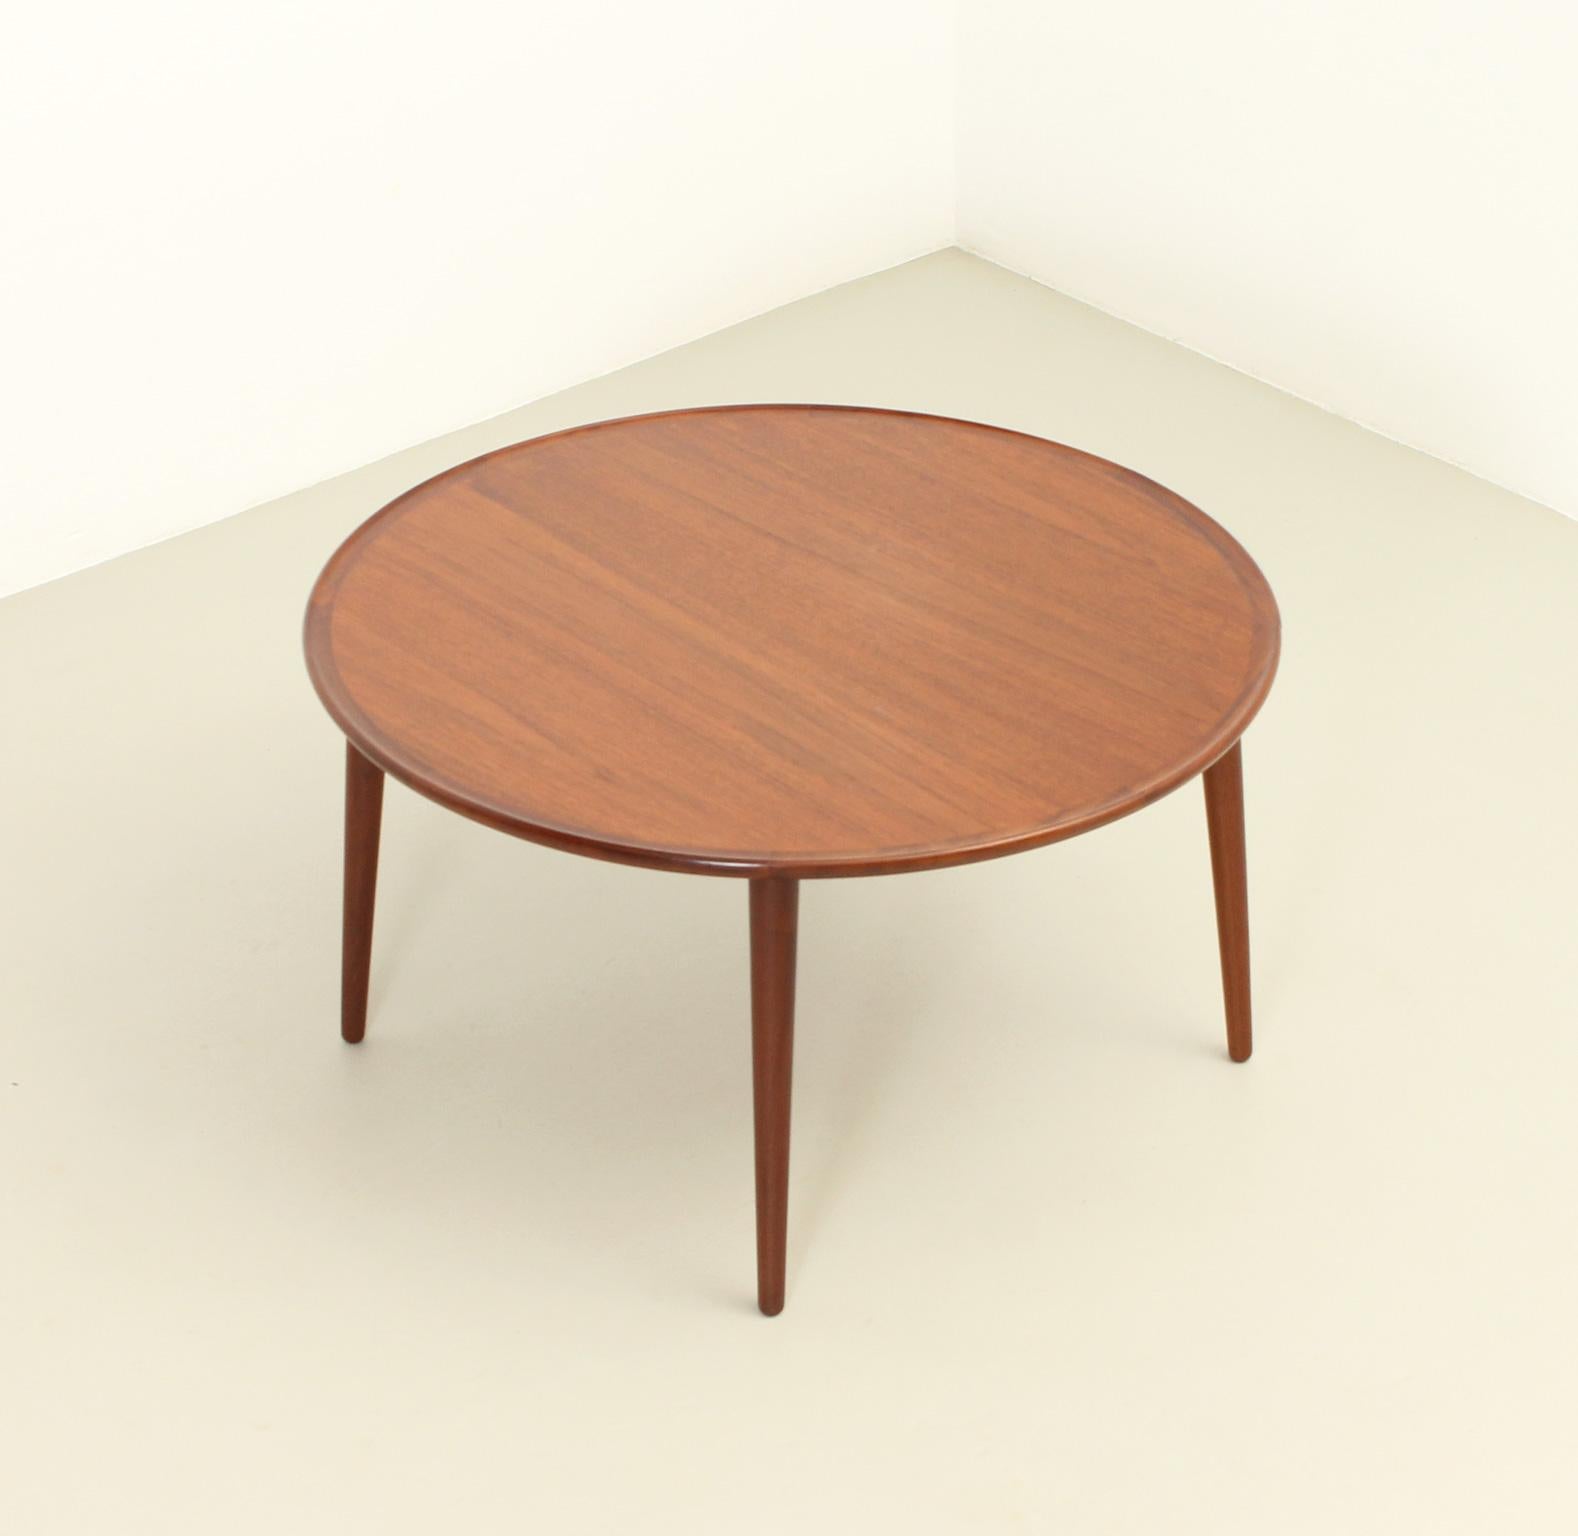 Round Coffee Table in Teak Wood by BC Møbler, Denmark, 1960's For Sale 5